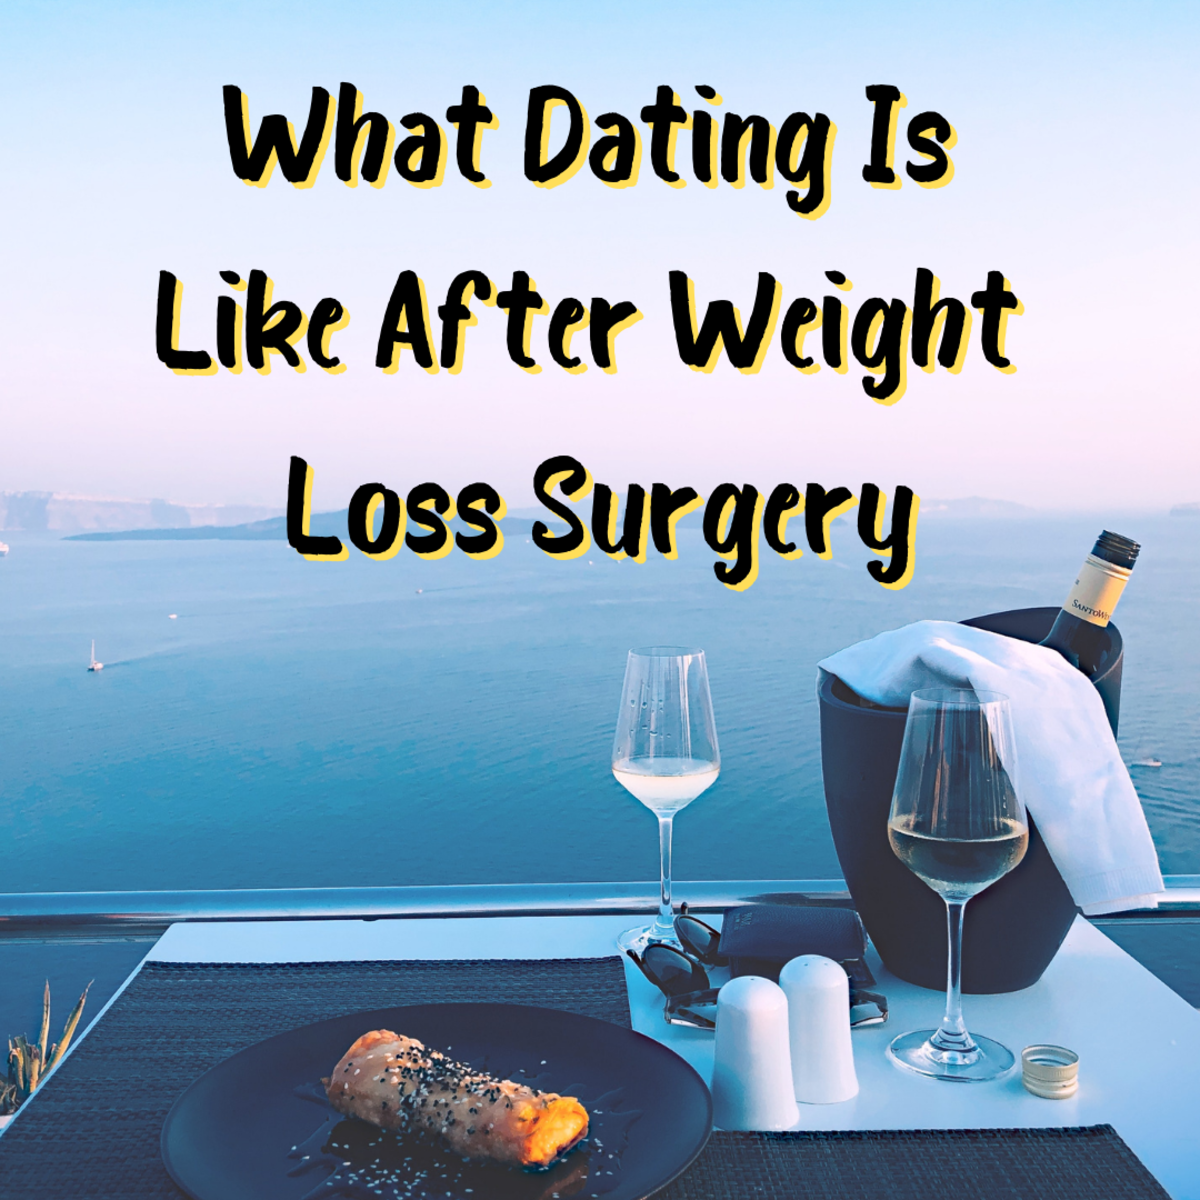 Dating After Bariatric Surgery: 6 Discoveries